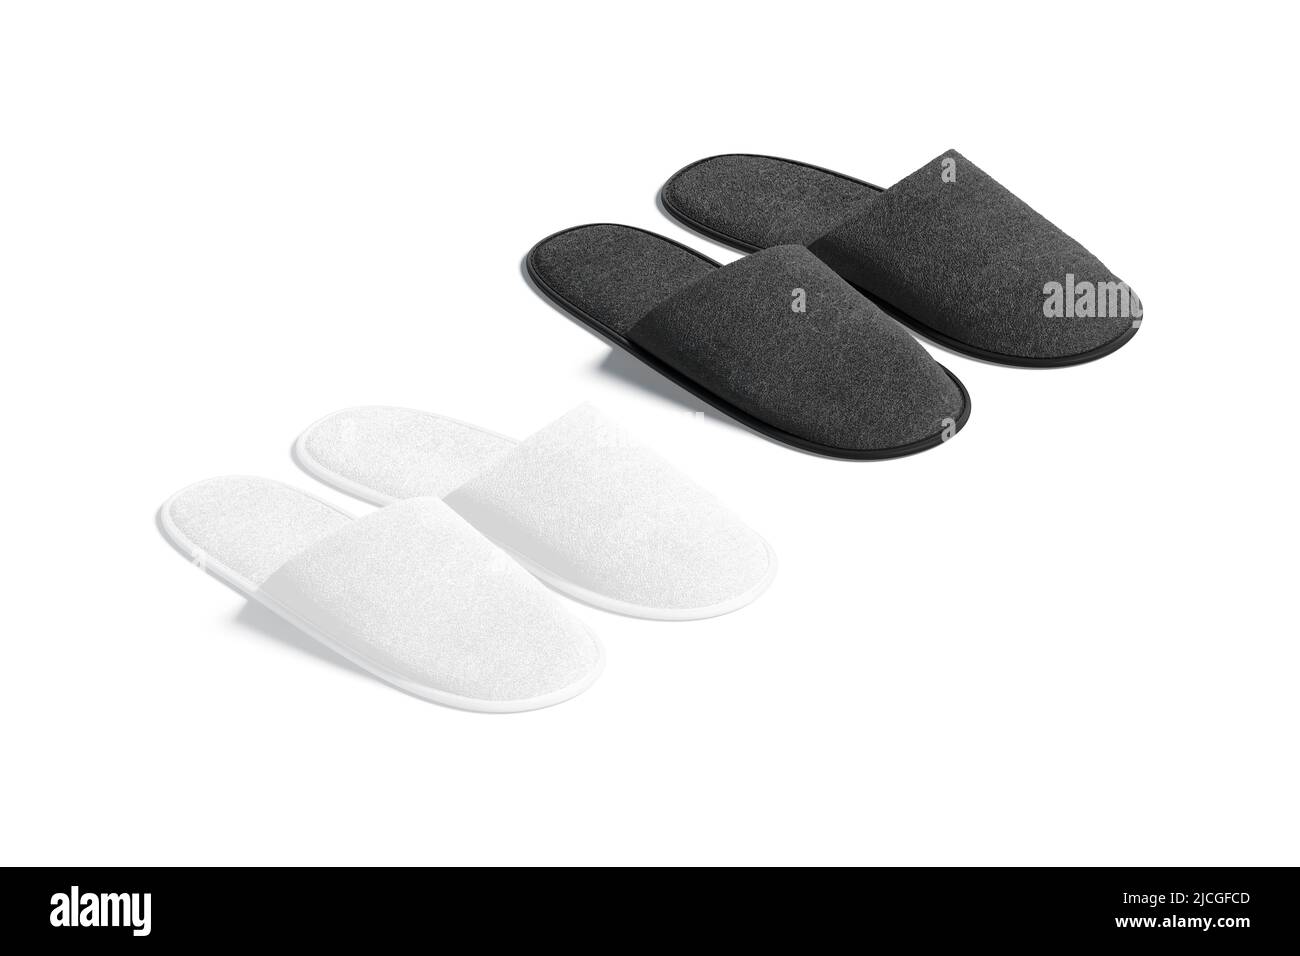 Blank black and white home slippers mock up, side view Stock Photo